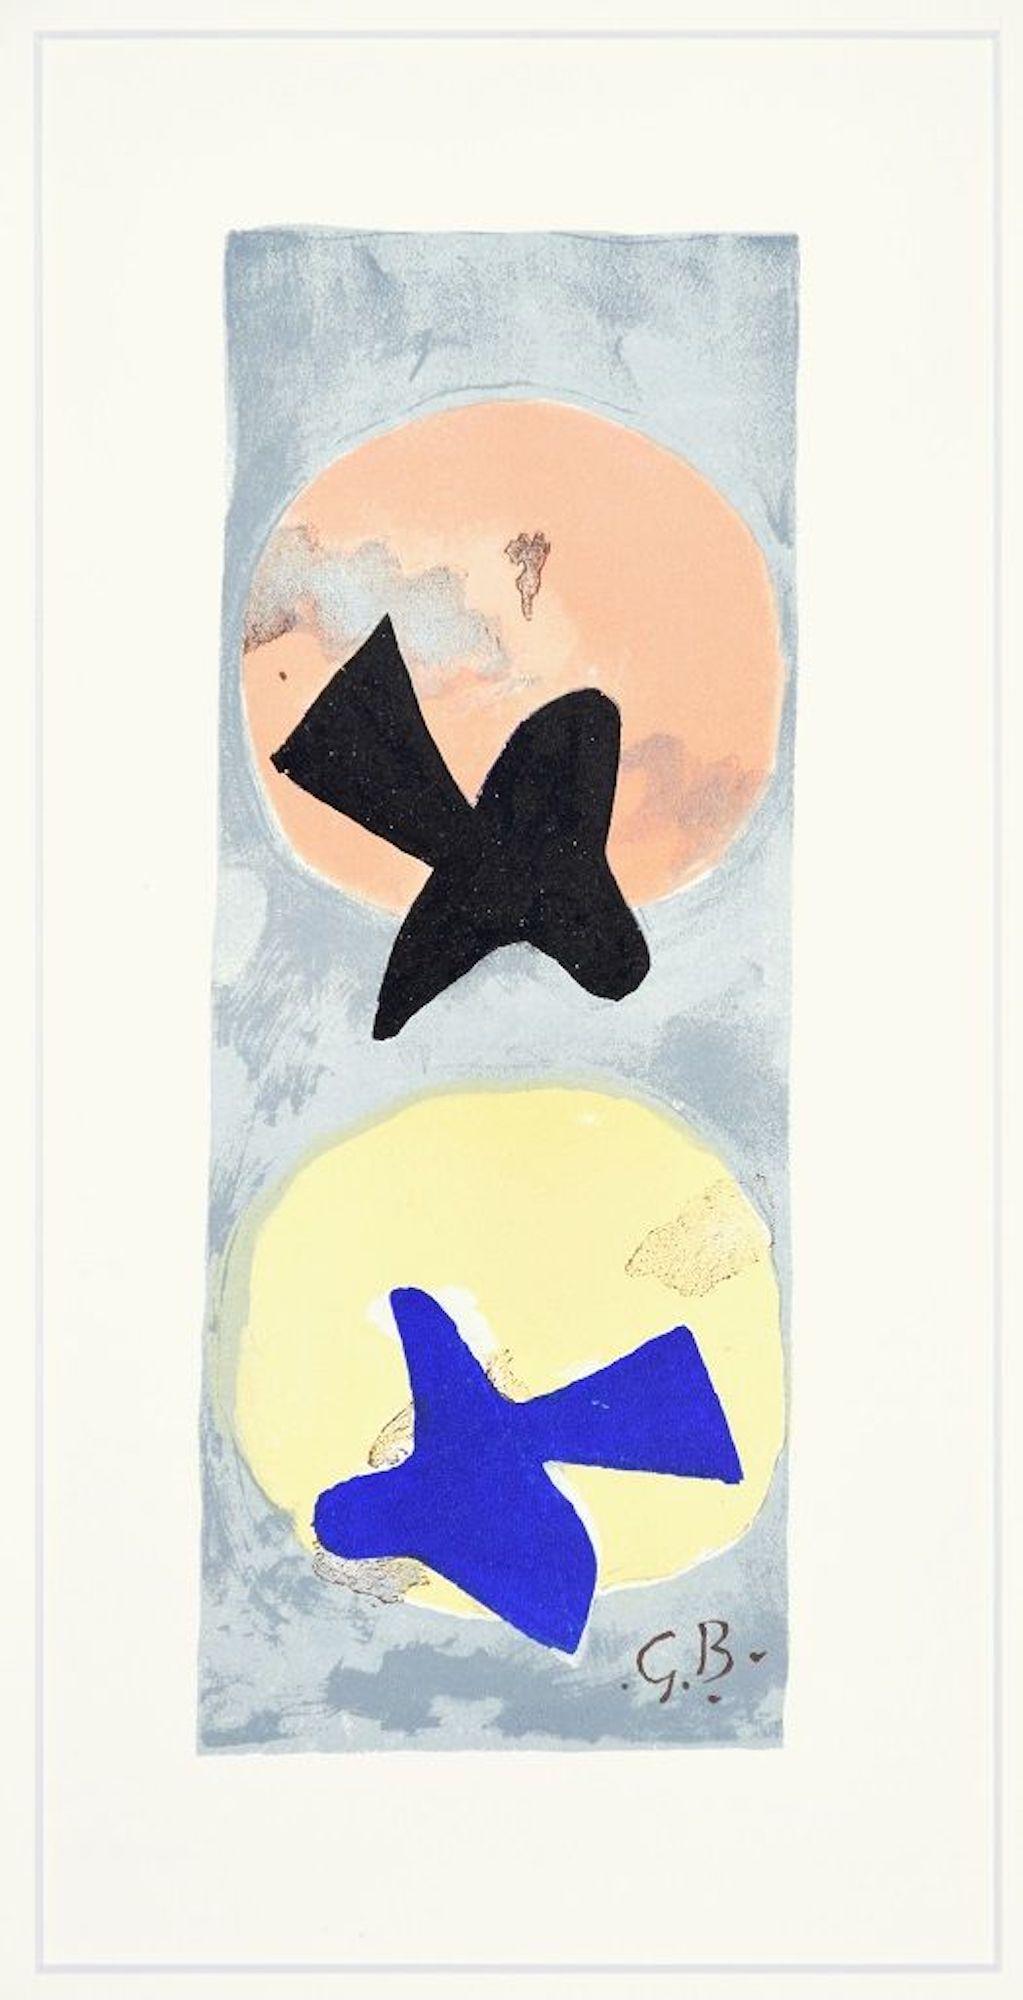 Soleil Et Lune II is an original artwork realized by George Braque in 1959.

Original colored lithograph. Monogrammed in the plate "G.B."  Text on the reverse.

Include passepartout: 50 x 39.5 cm

Published by Maeght, Paris; printed by Mourlot,